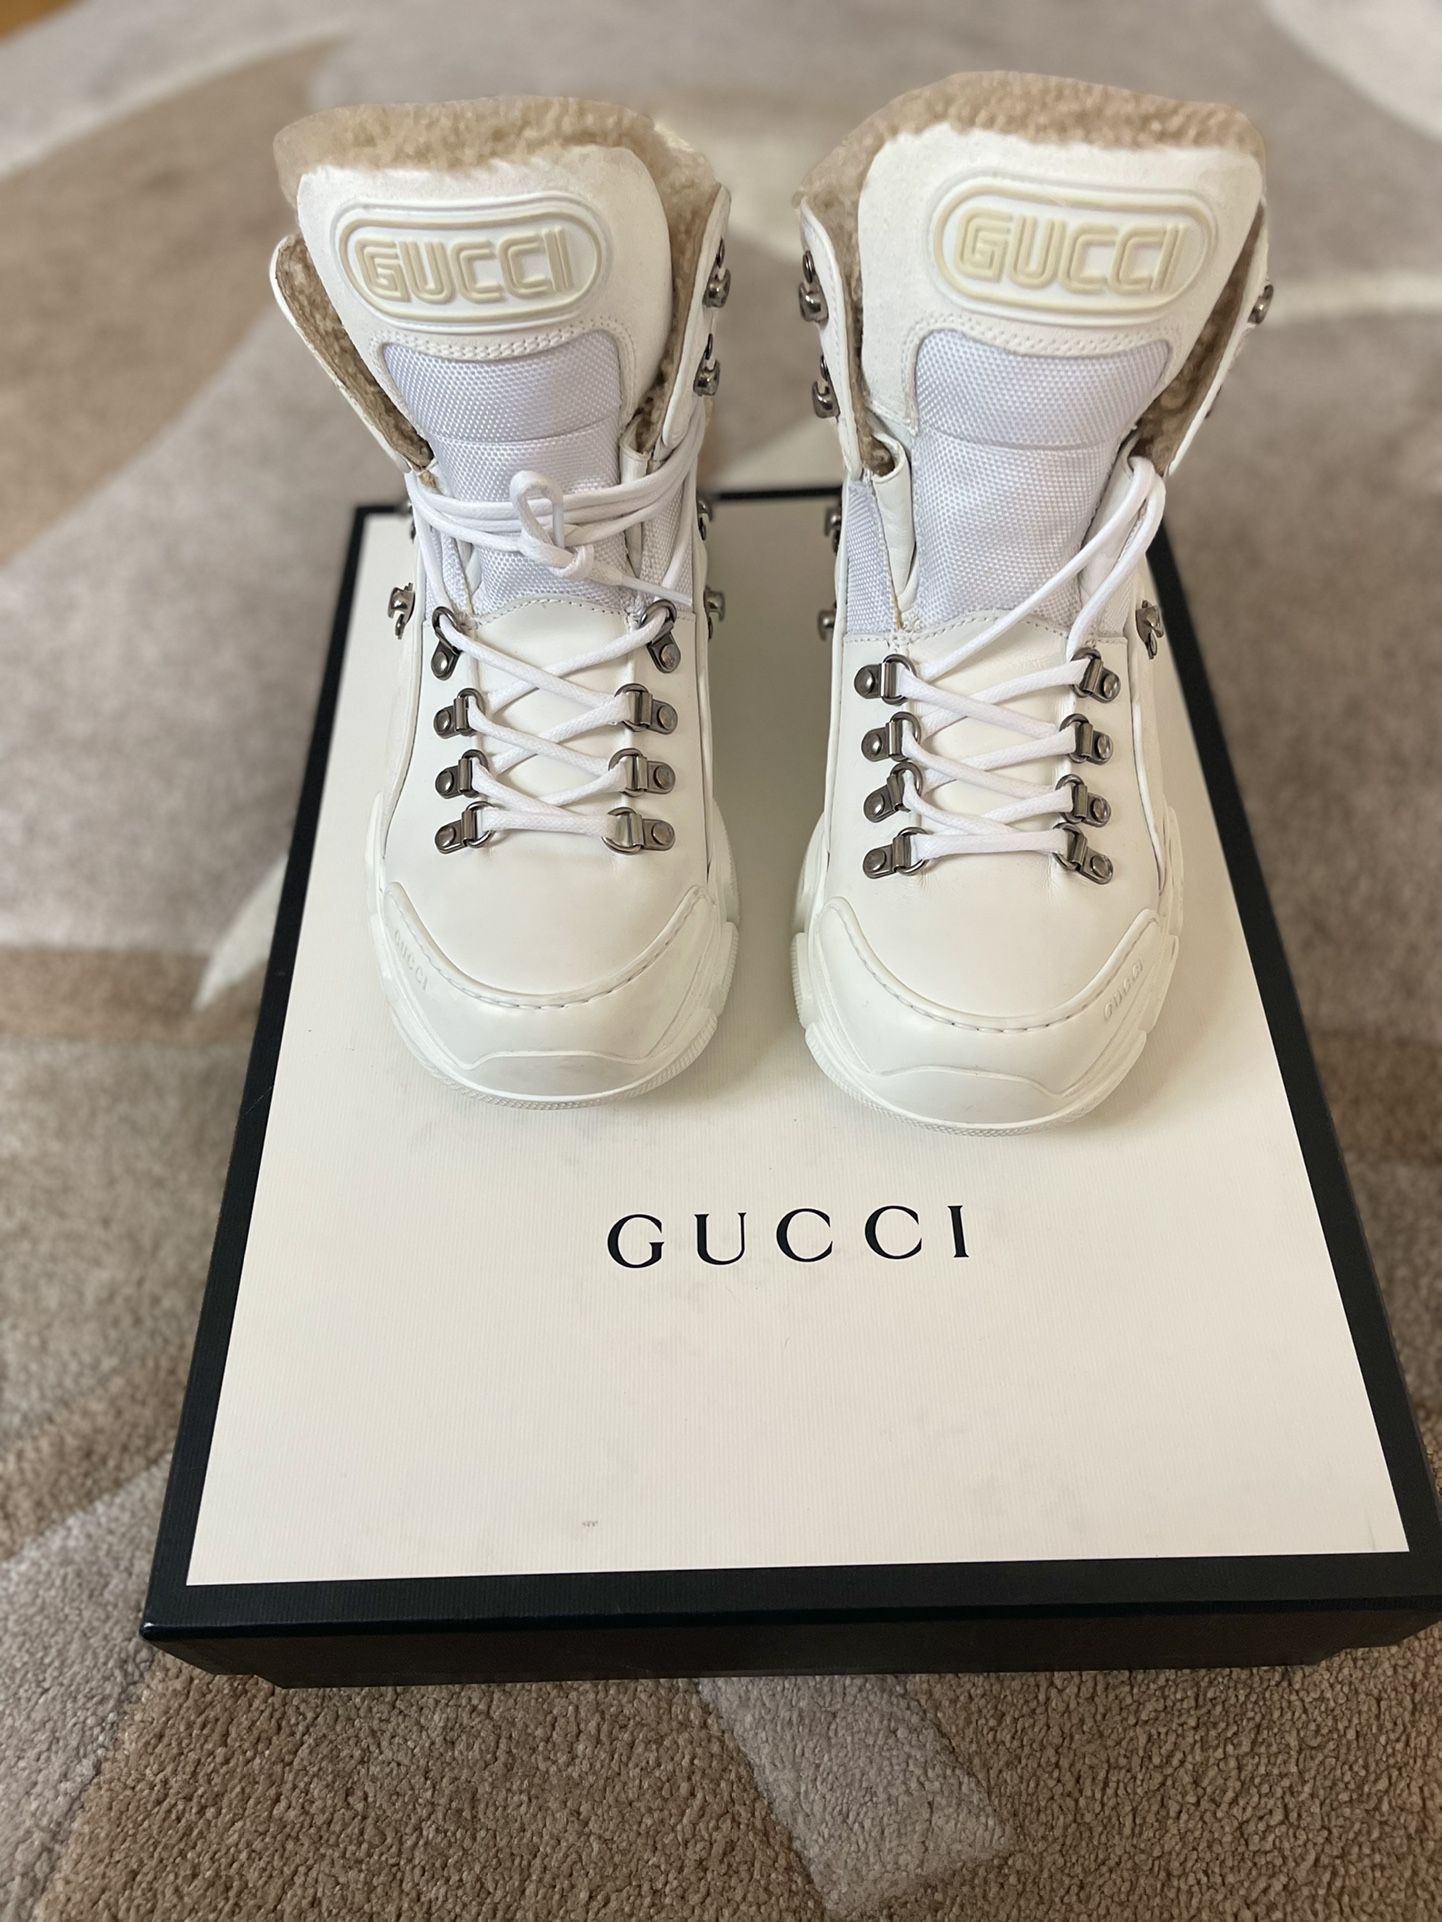 Gucci Flashtek Leather Sneakers/hiking Boots